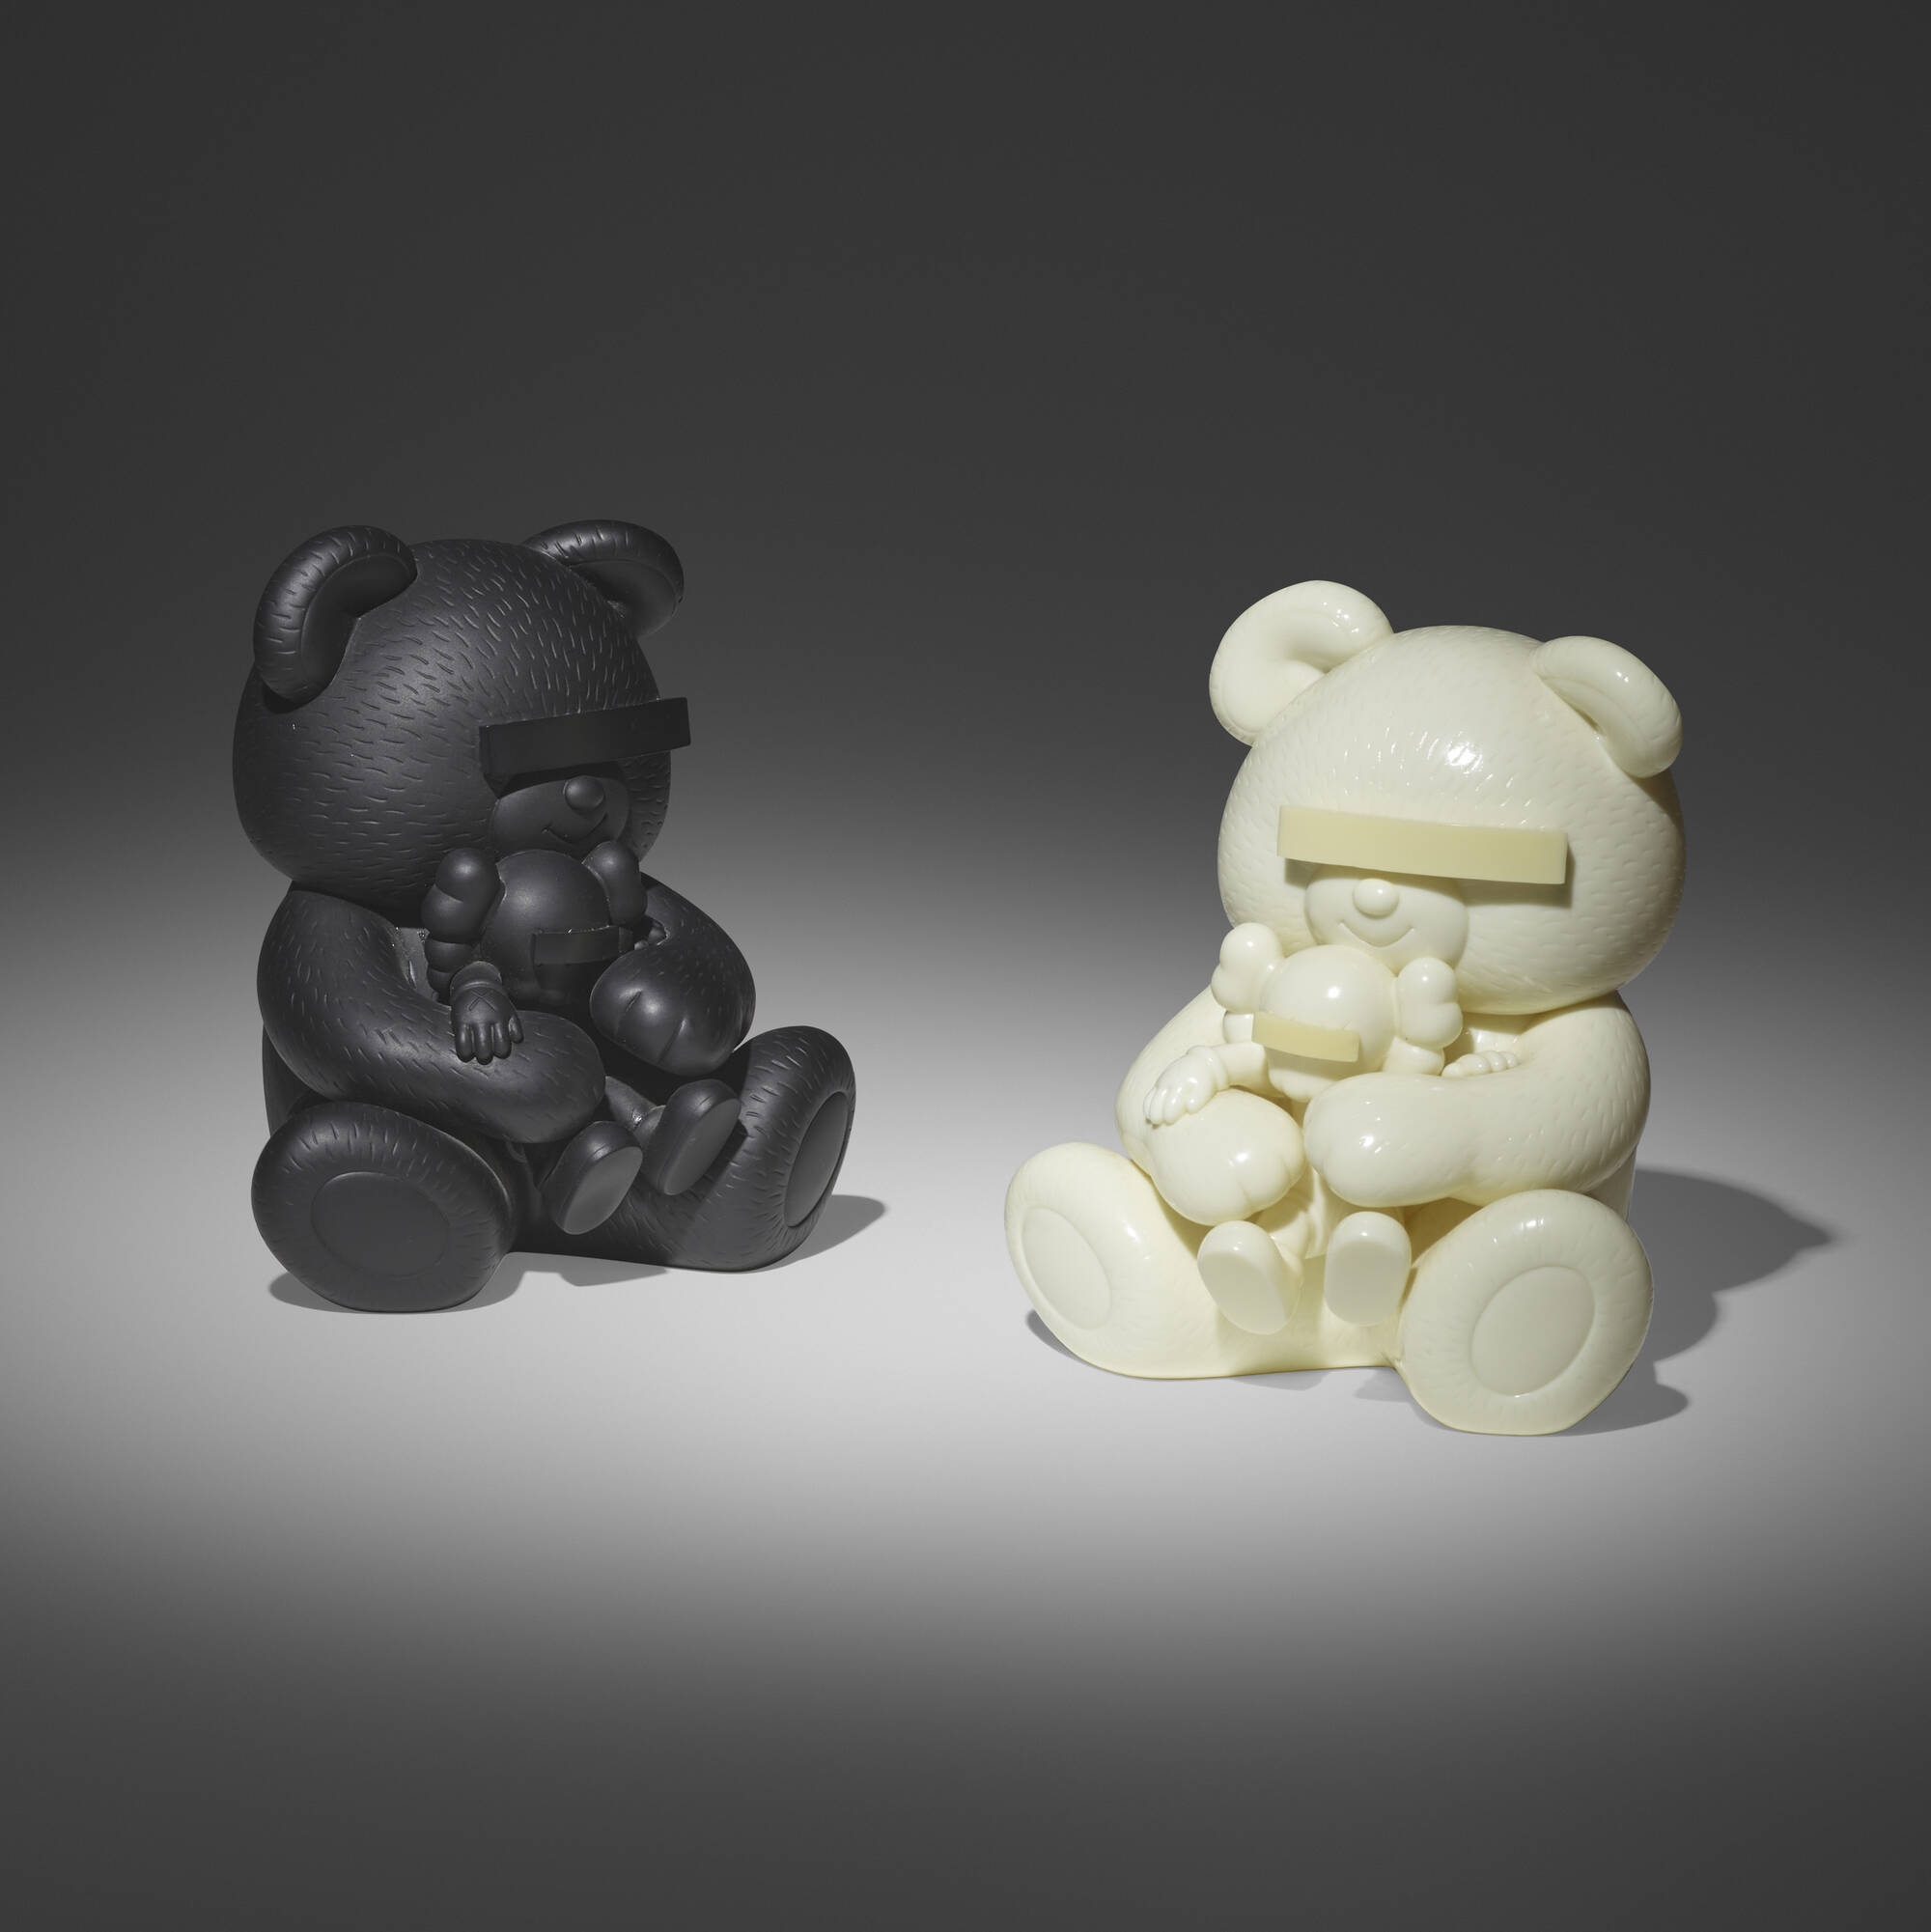 111: KAWS (BRIAN DONNELLY), Undercover Bear (Black); Undercover 